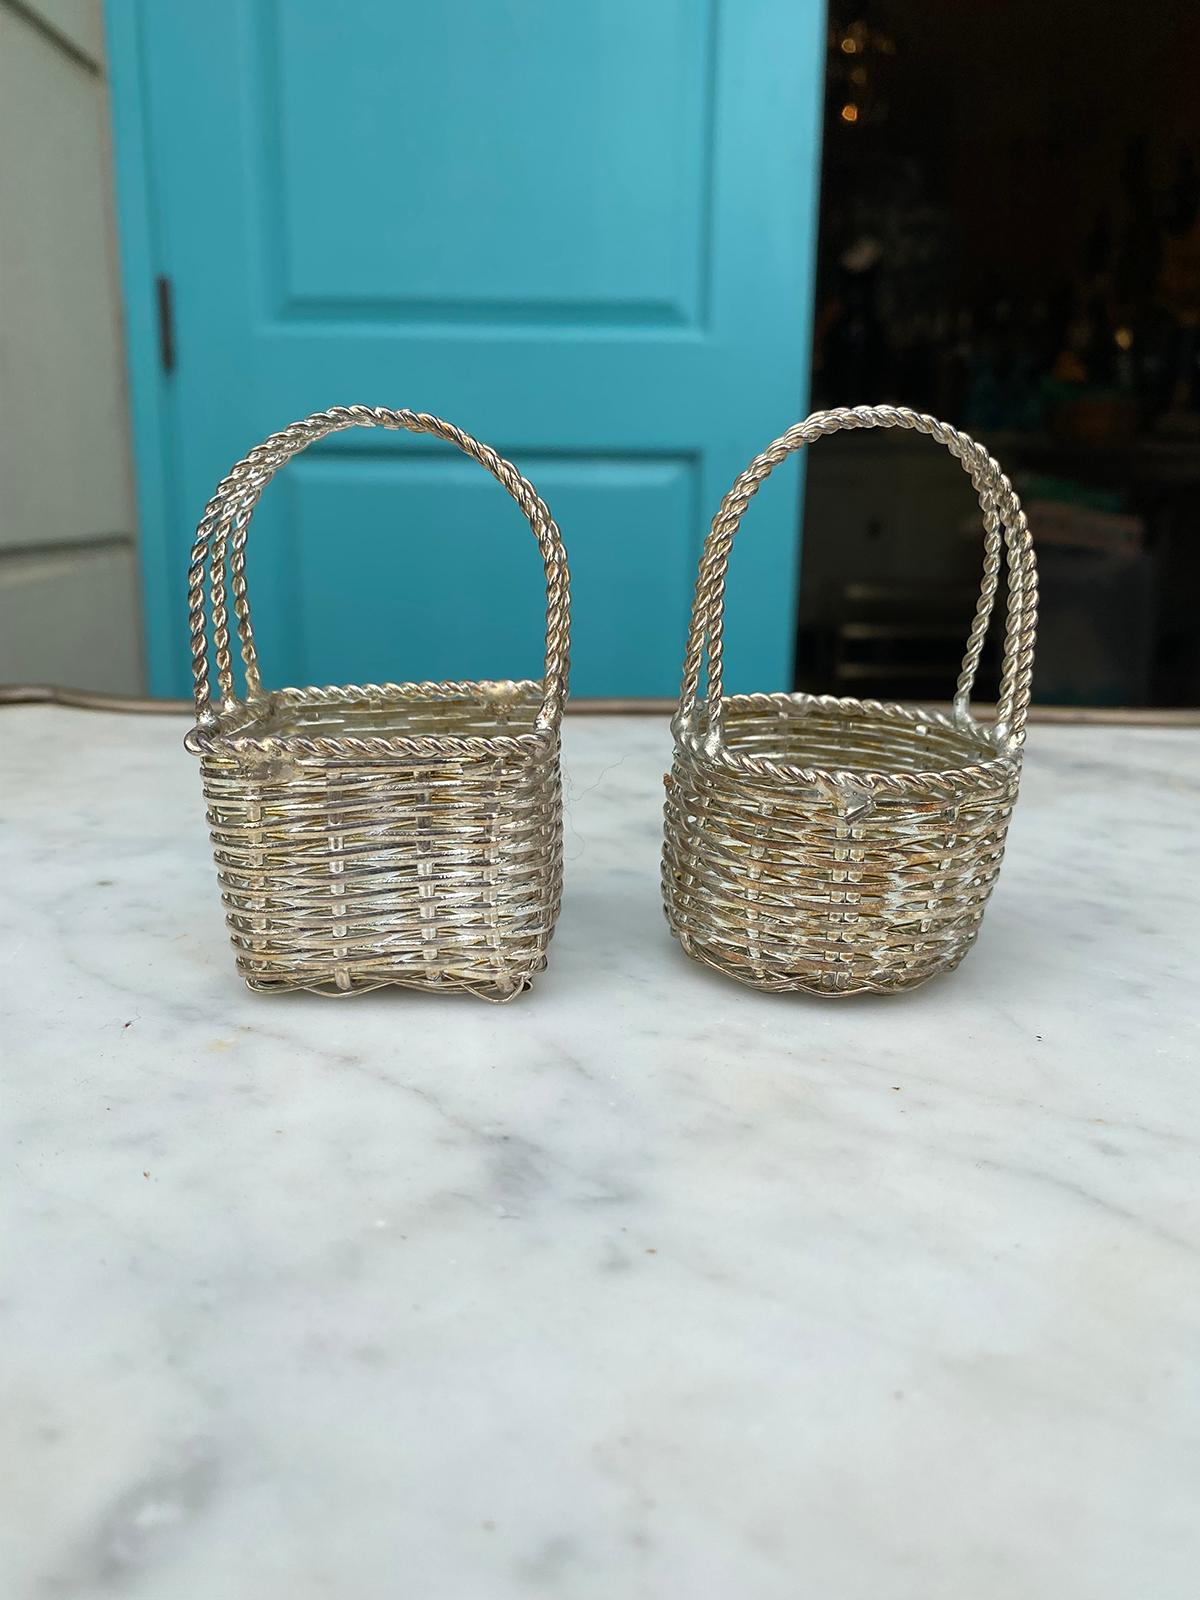 Two miniature 20th century woven silvered baskets, unmarked
Measures: Square:2